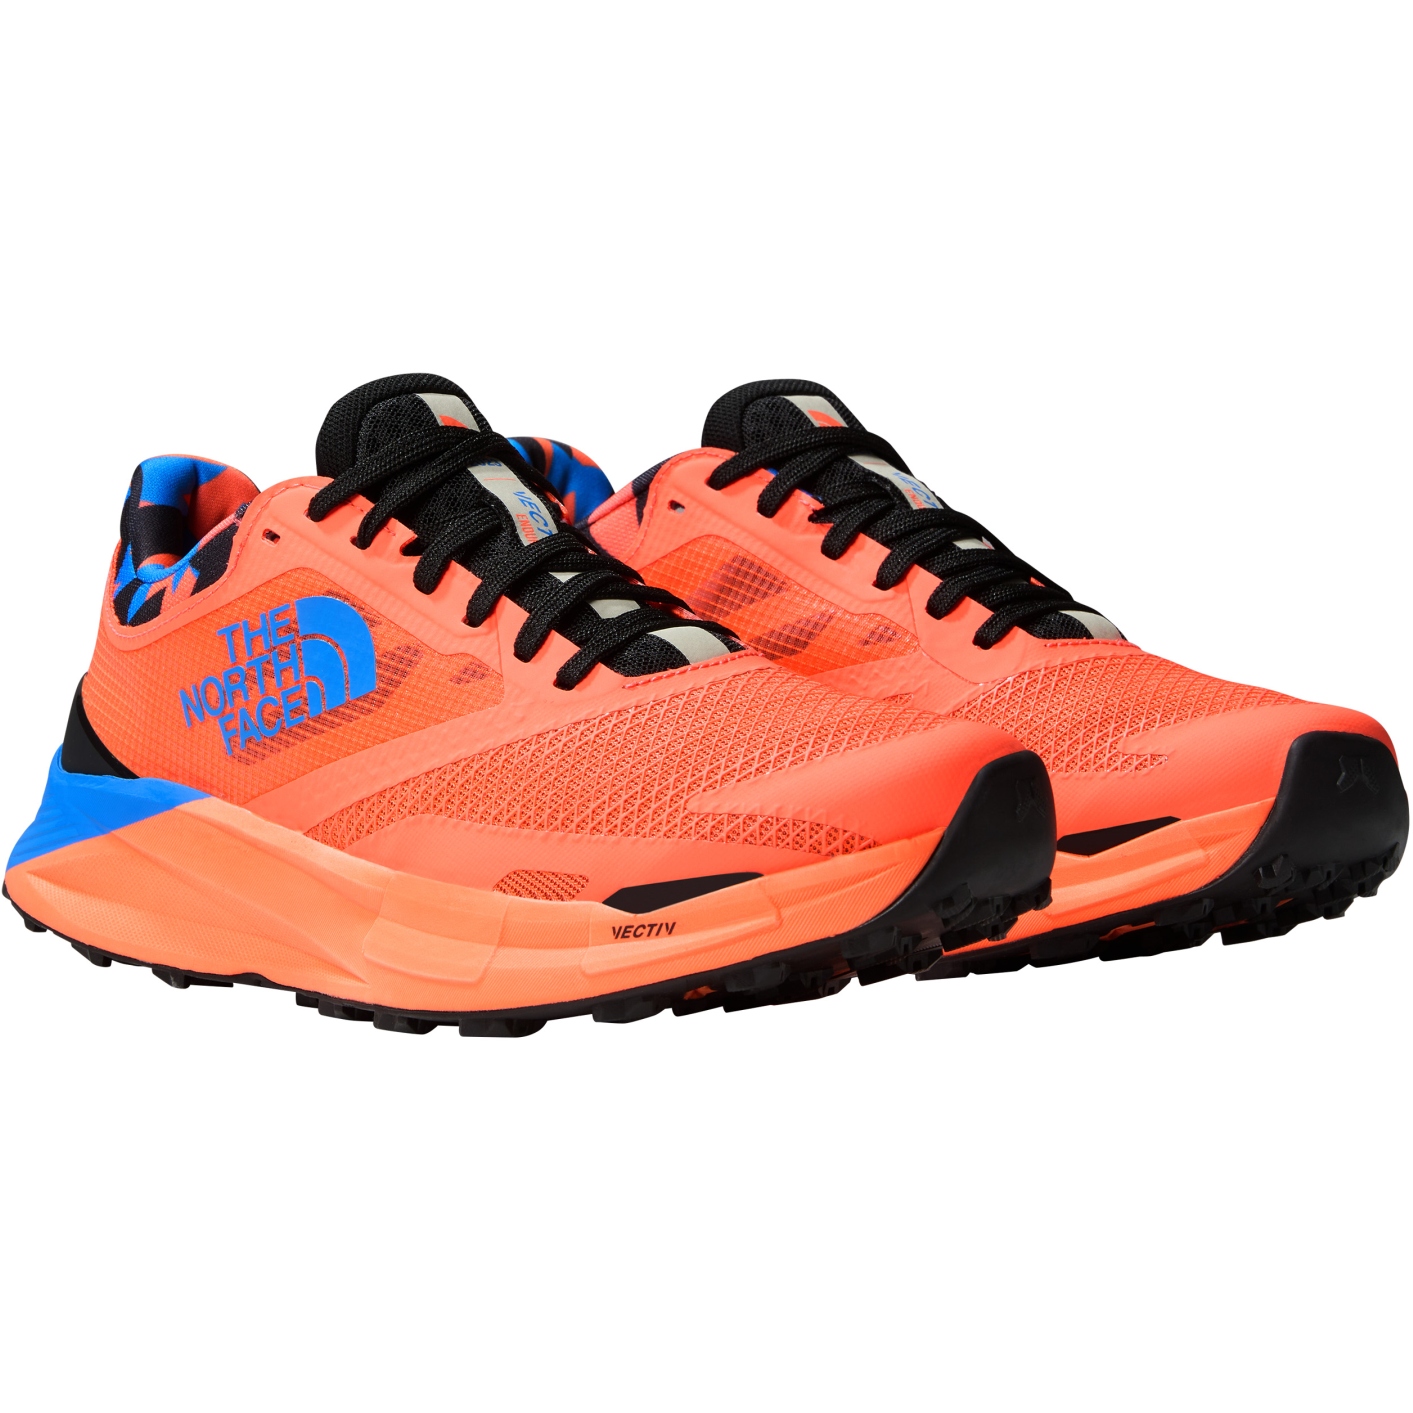 Picture of The North Face VECTIV™ Enduris III Athlete Trail Running Shoes Women - Solar Coral/Optic Blue